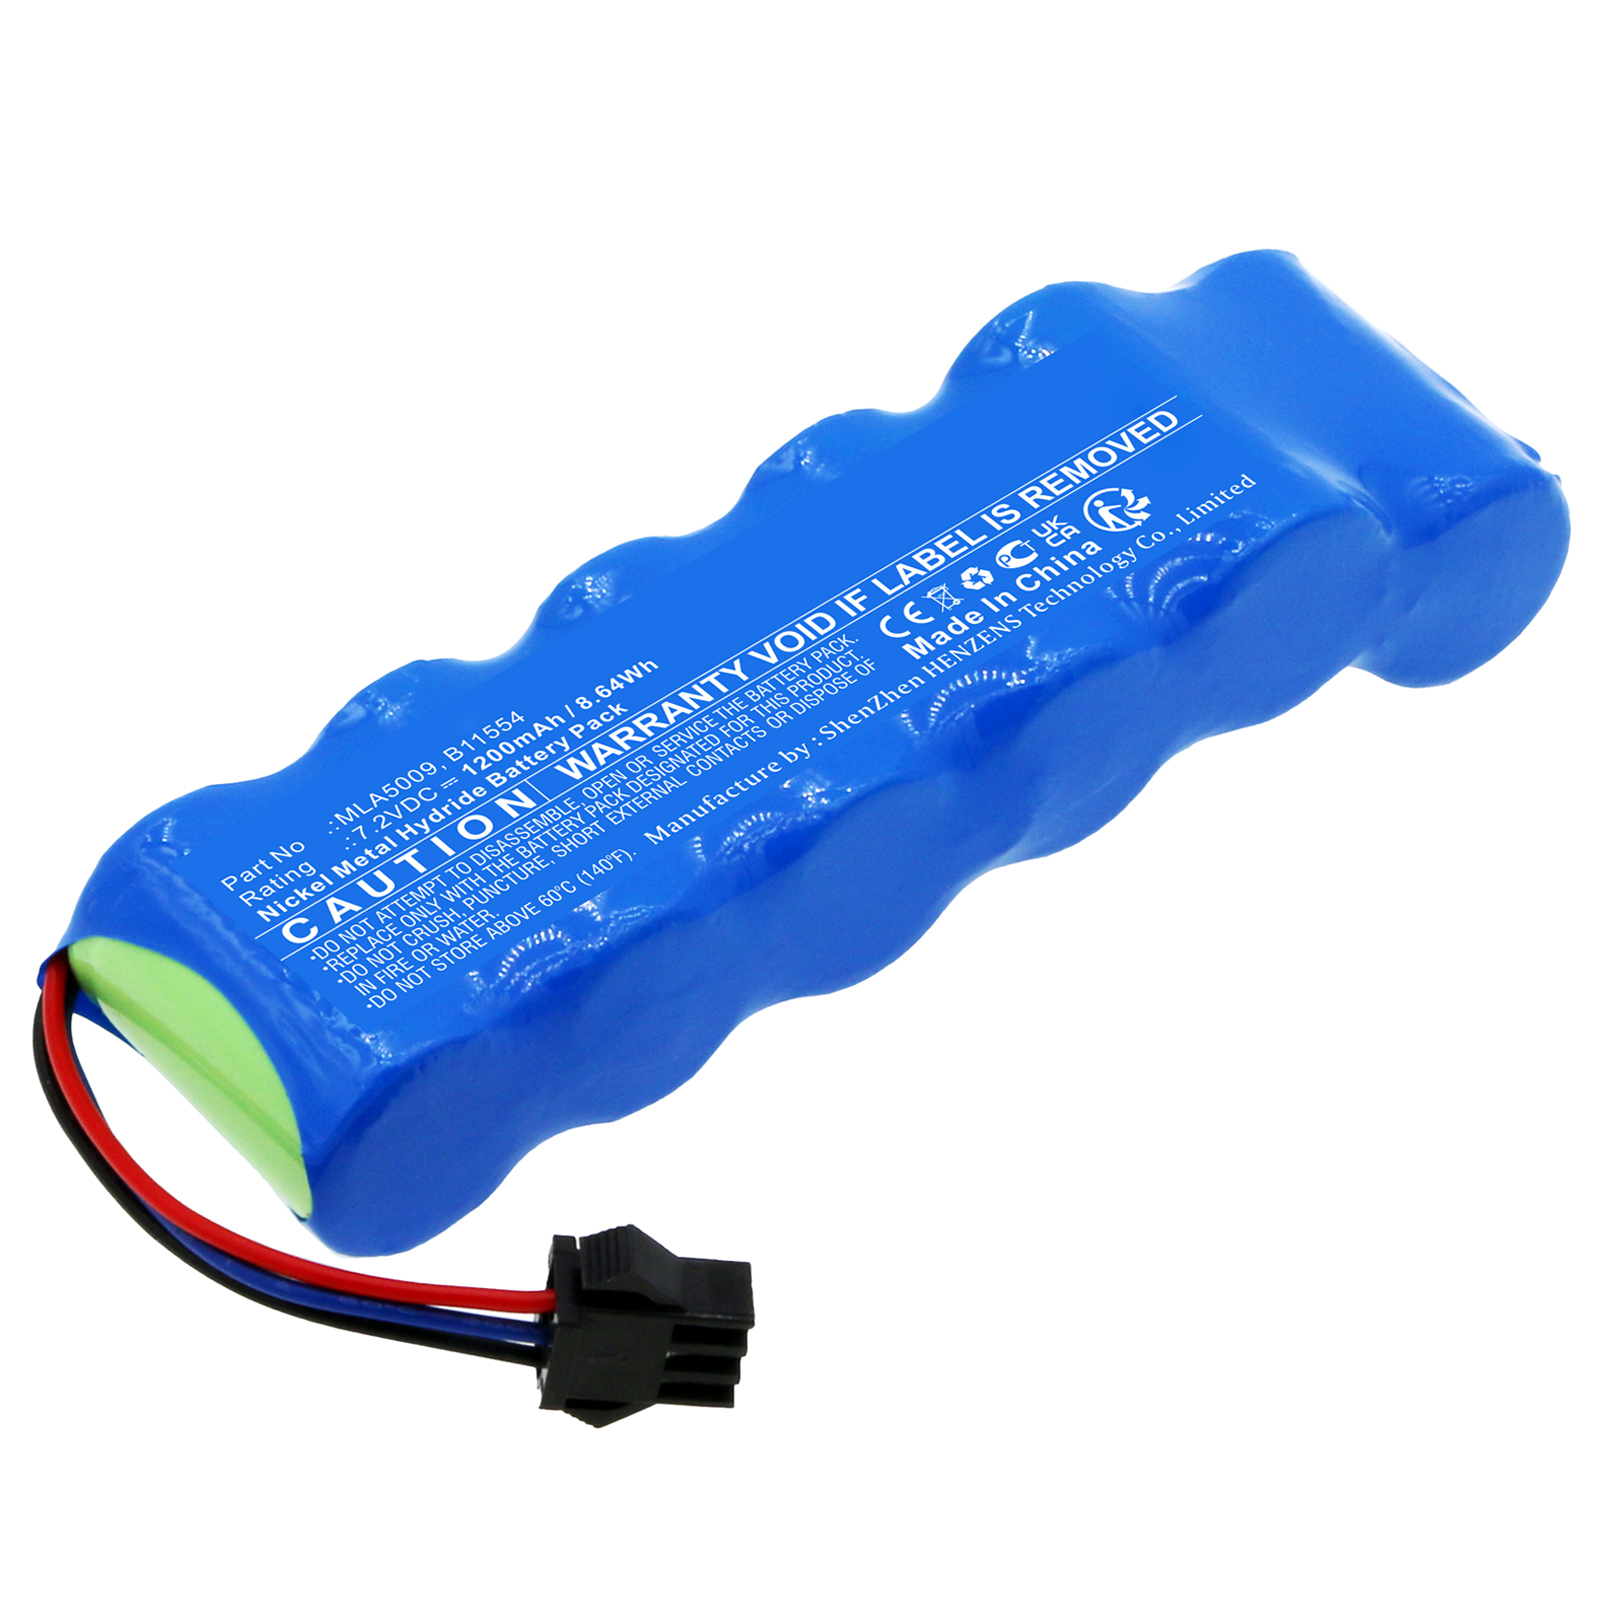 Synergy Digital Medical Battery, Compatible with Micro Medical B11554 Medical Battery (Ni-MH, 7.2V, 1200mAh)